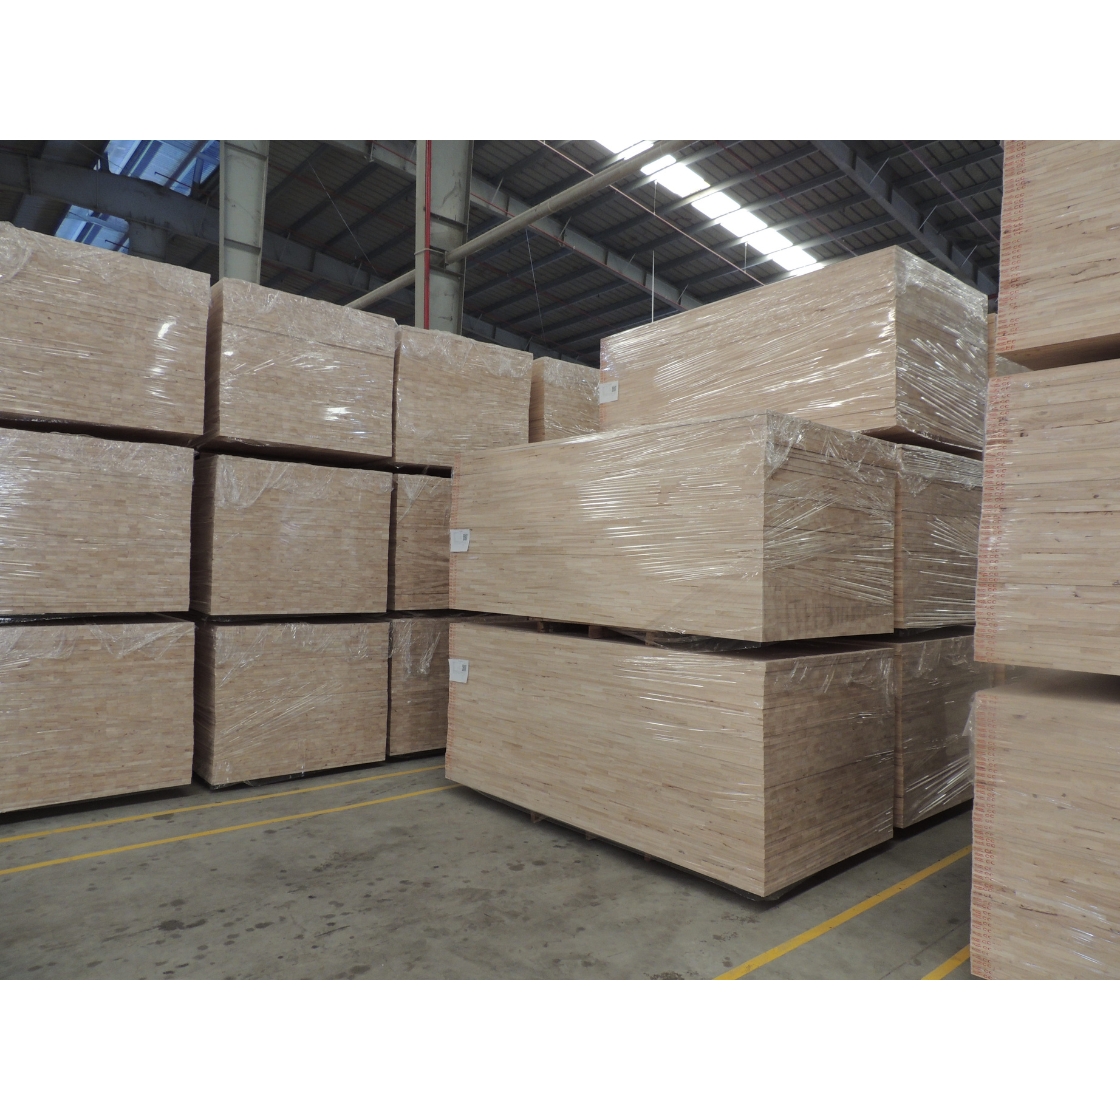 Rubber Wood Material Durable Export Cabinet Doors Frame And Components Fsc-Coc Plastic Bag Made In Vietnam Manufacturer